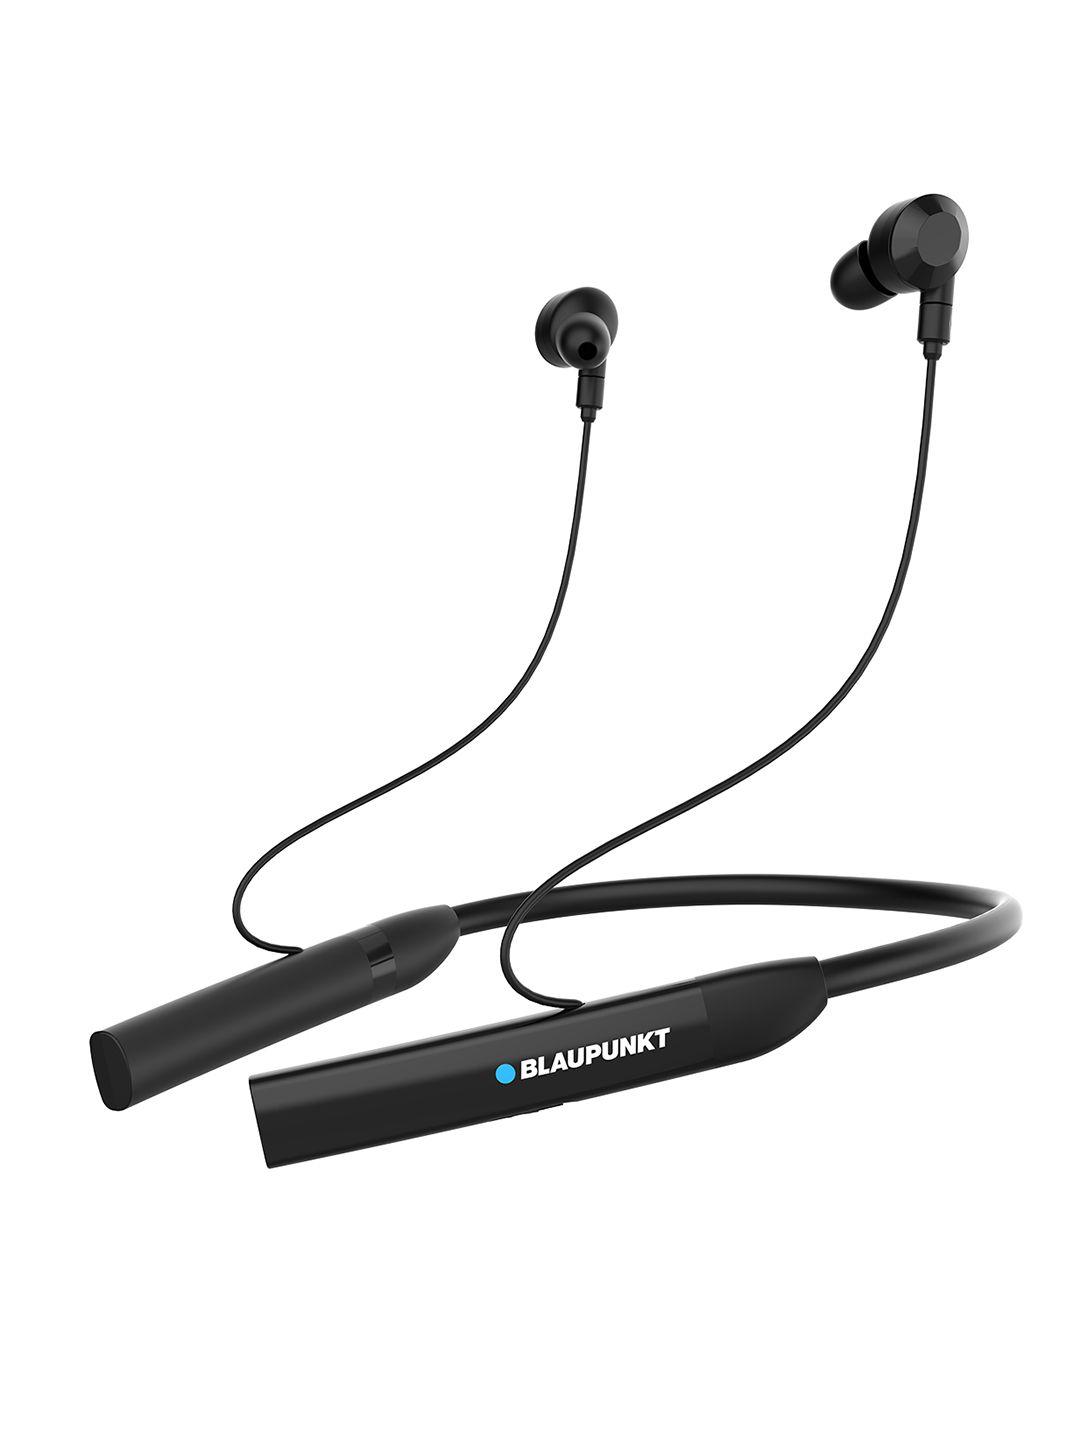 blaupunkt be200 neckband with real time monitoring bluetooth headset - black